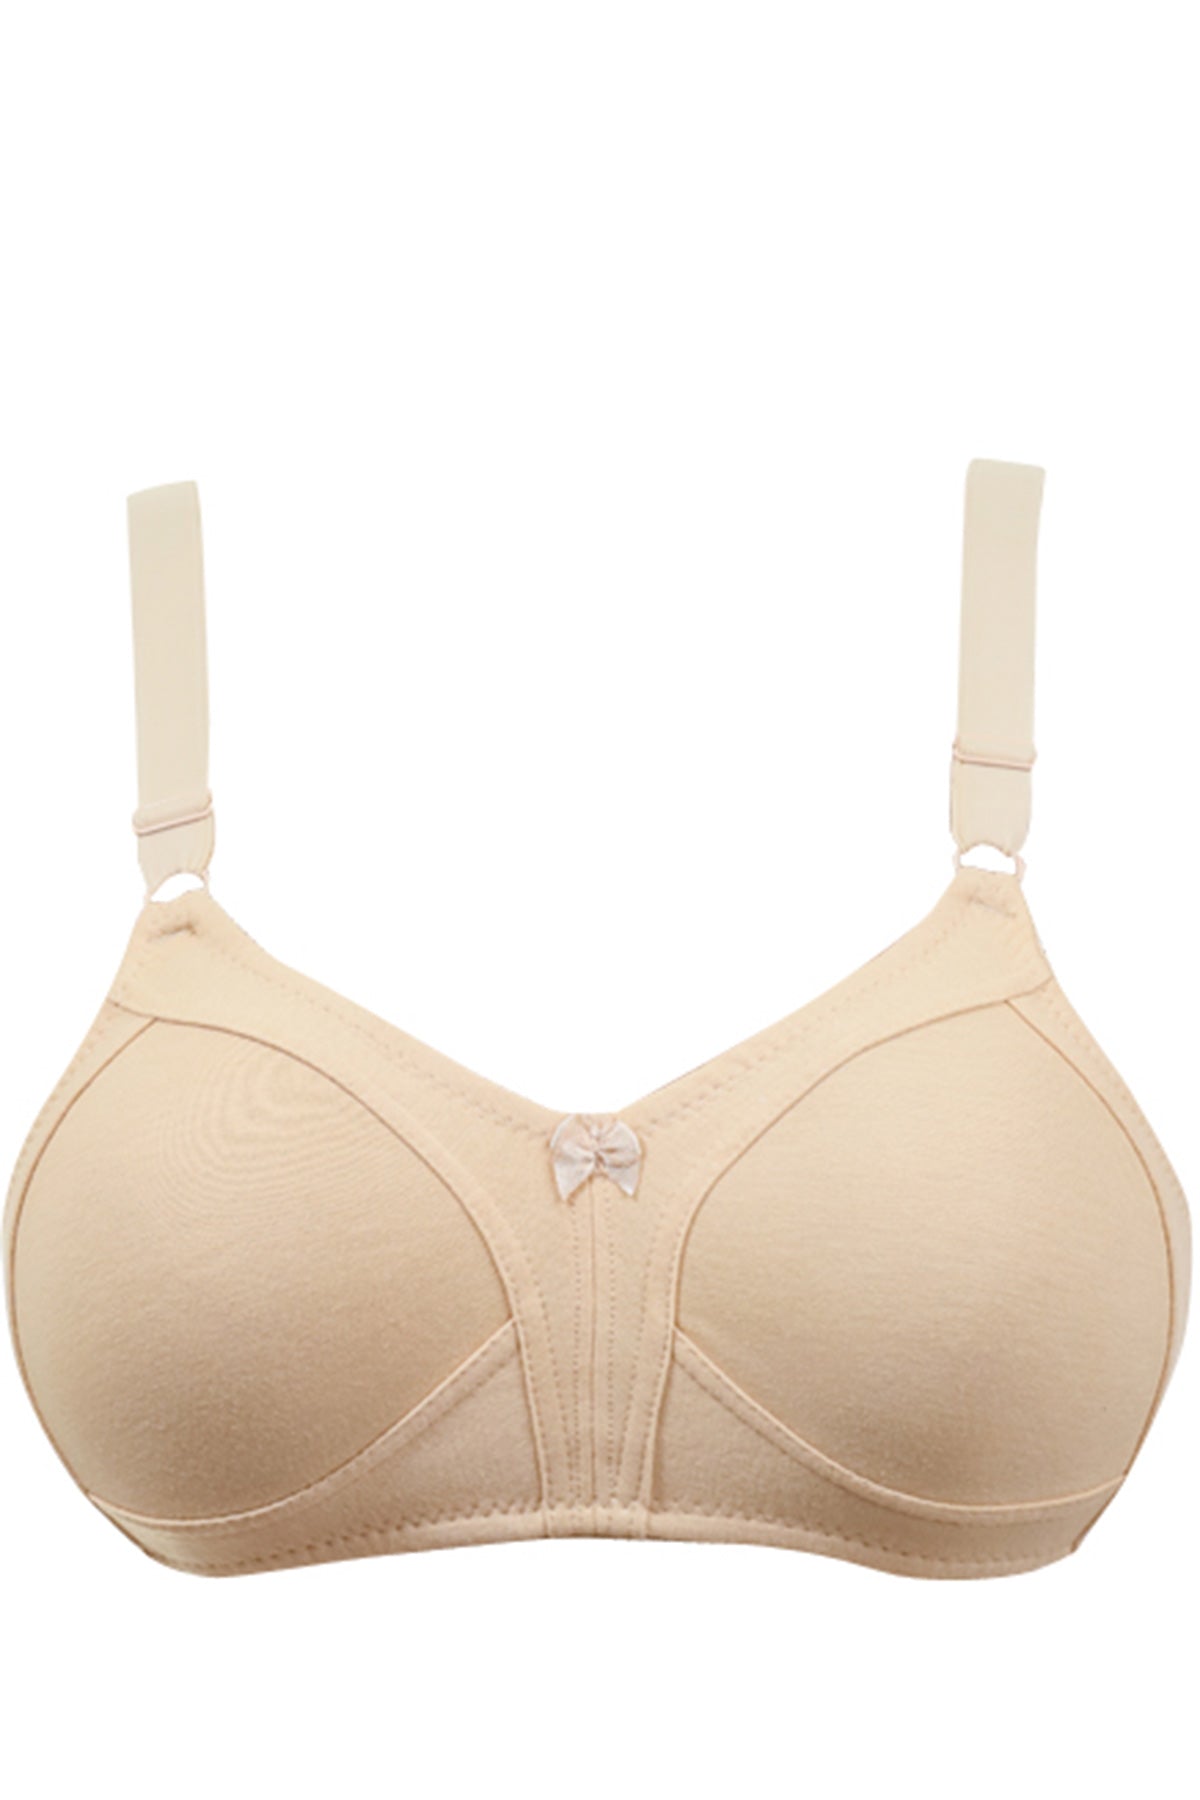 BLS - Cali Non Wired And Non Padded Cotton Bra - Skin